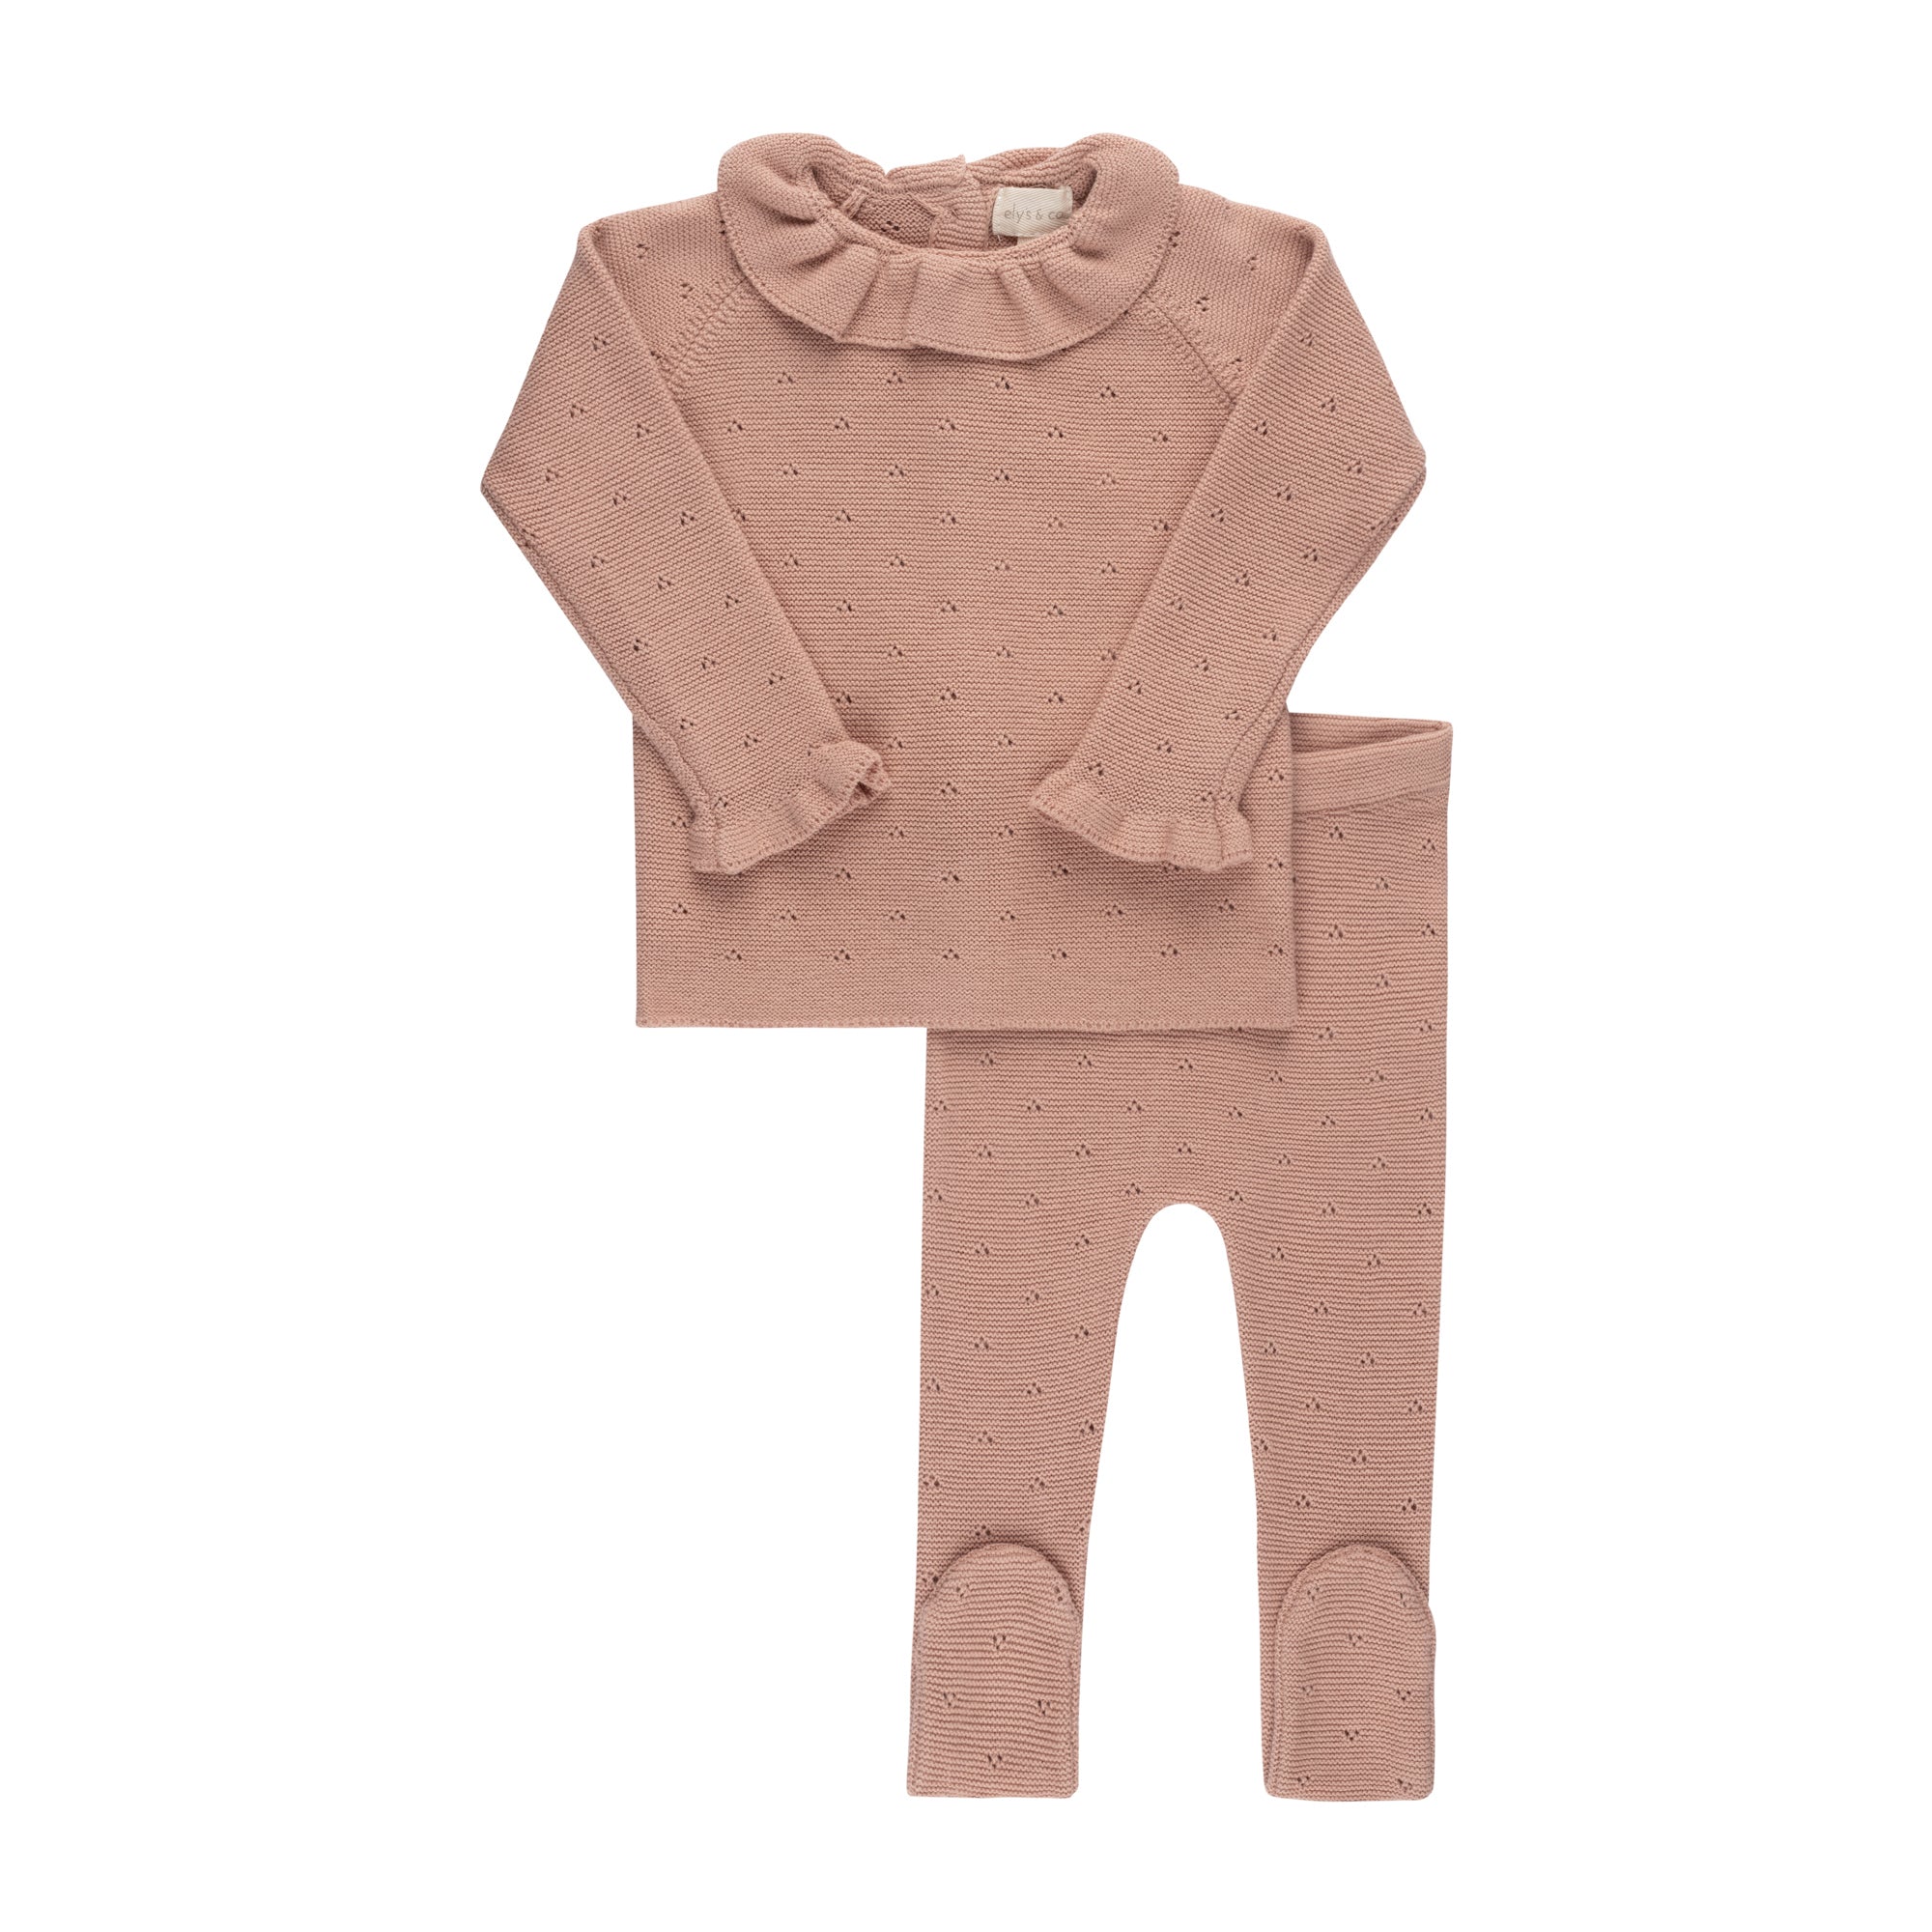 Pointelle Knit Collection - 2 Piece set